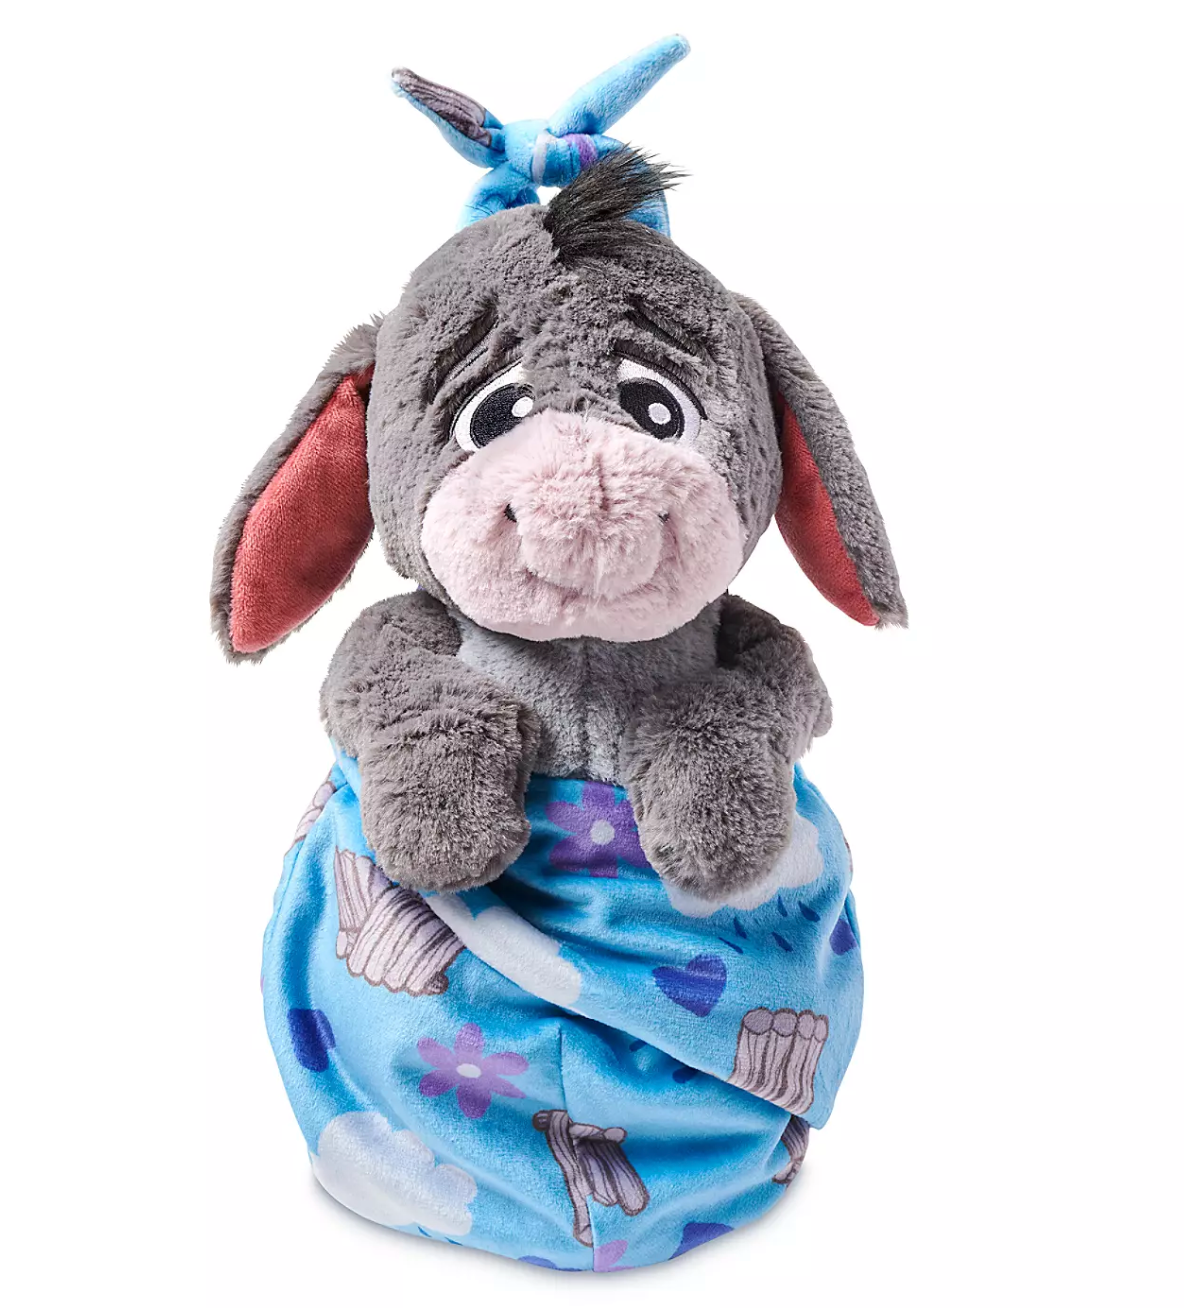 Disney Parks Eeyore Baby in Blanket Pouch Plush New with Tags